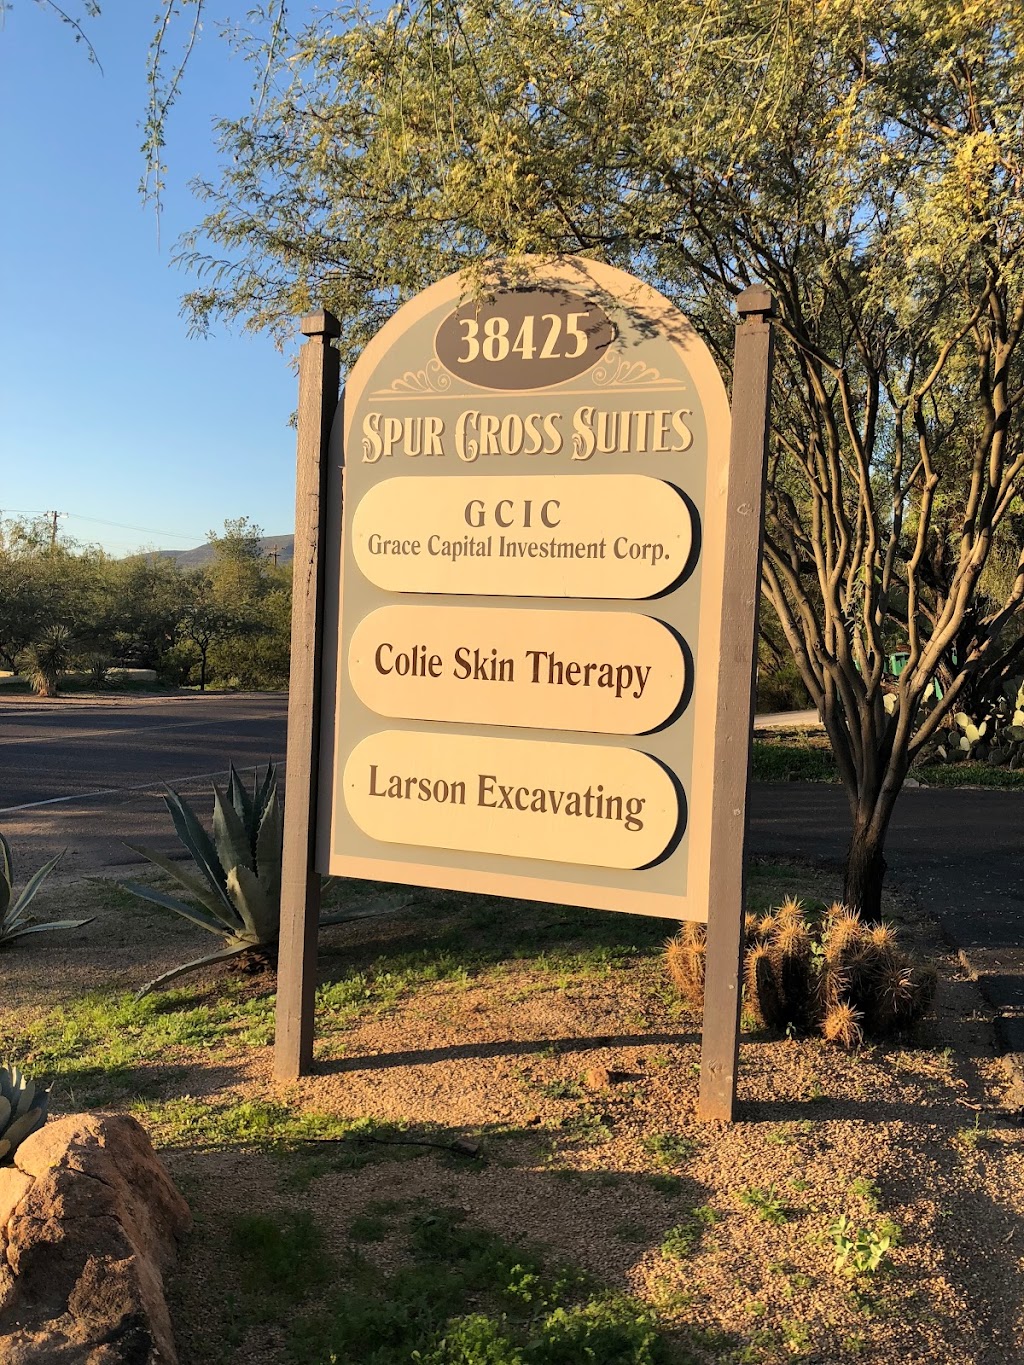 Colie Skin Therapy | 38425 N Spur Cross Rd Suite #3, Cave Creek, AZ 85331 | Phone: (480) 865-4979